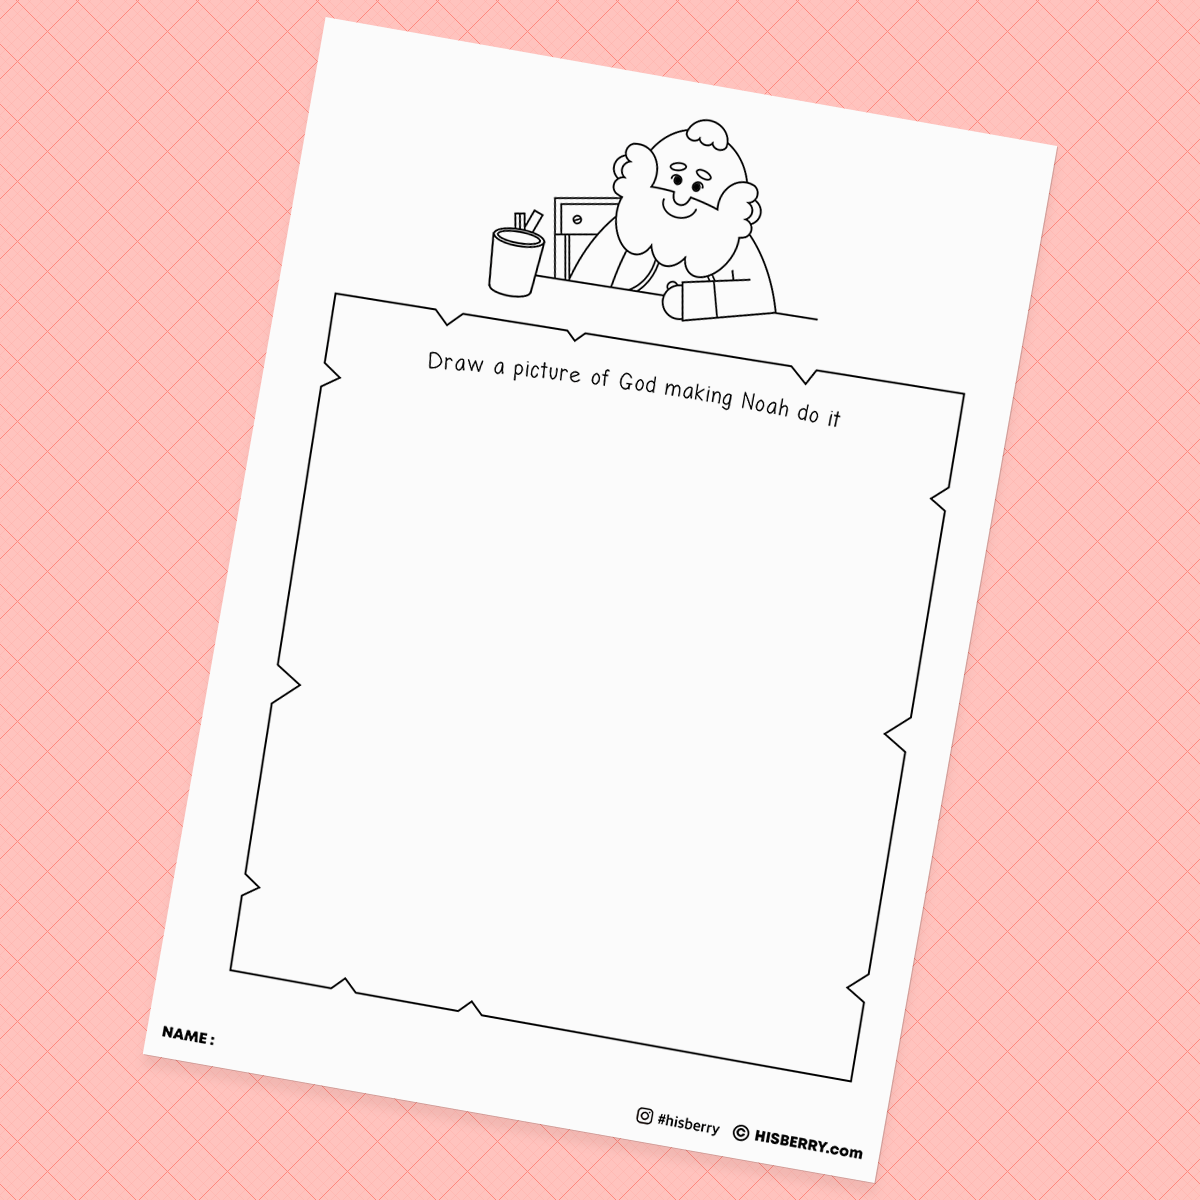 Noah builds the ark1- Bible Verse Worksheet Pack for Kid Lesson